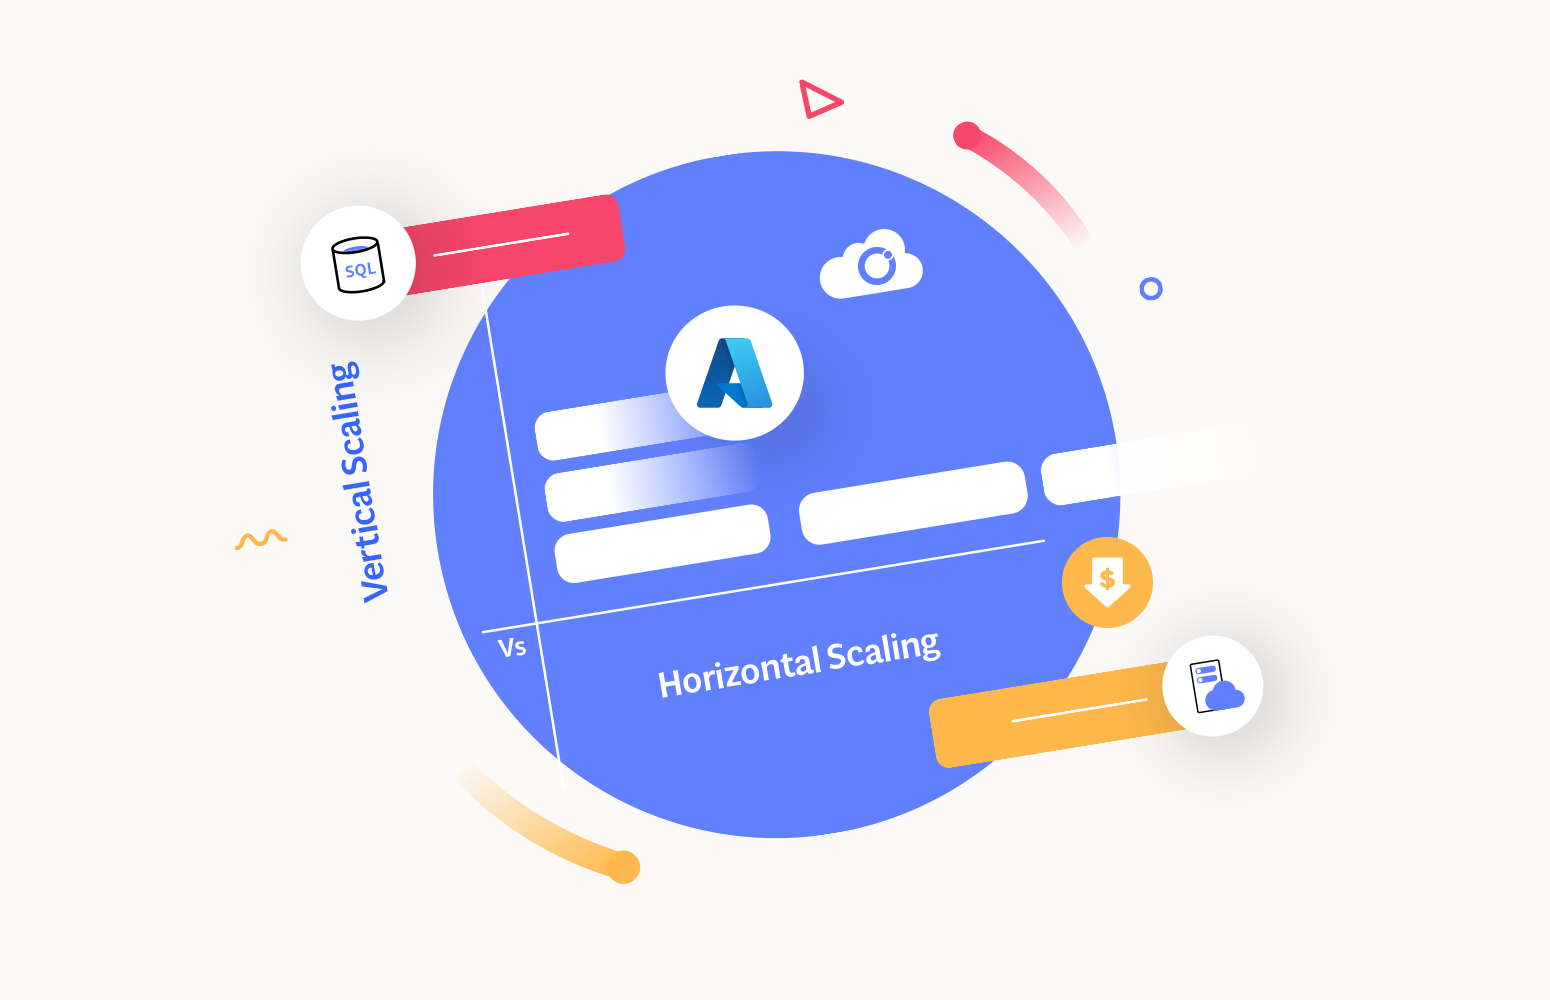 Azure Horizontal Scaling vs Vertical Scaling featured image